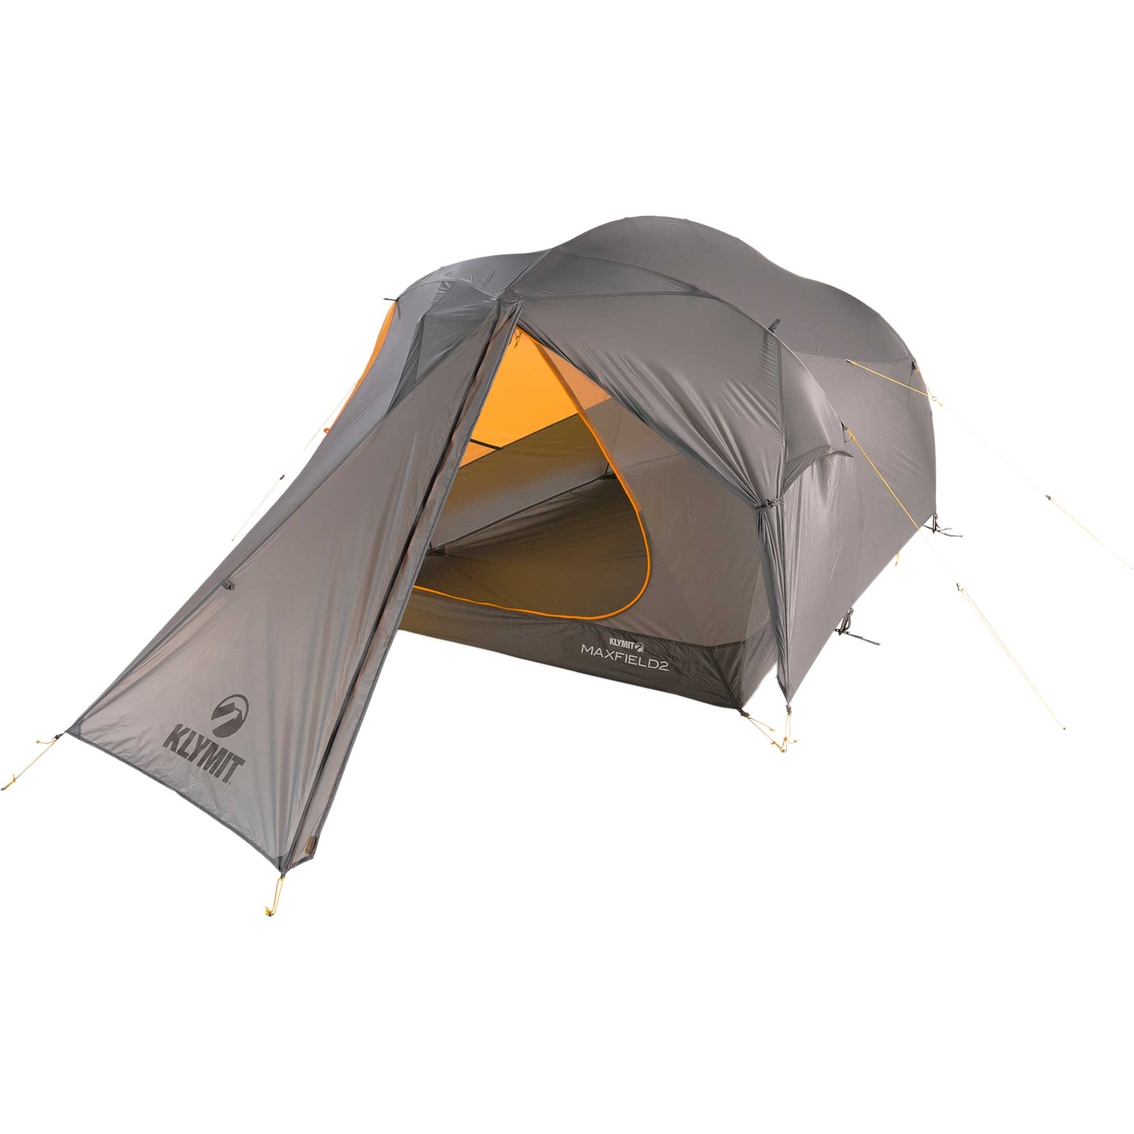 Klymit Maxfield 2 Person Lightweight Backpacking Tent - Image 2 of 10